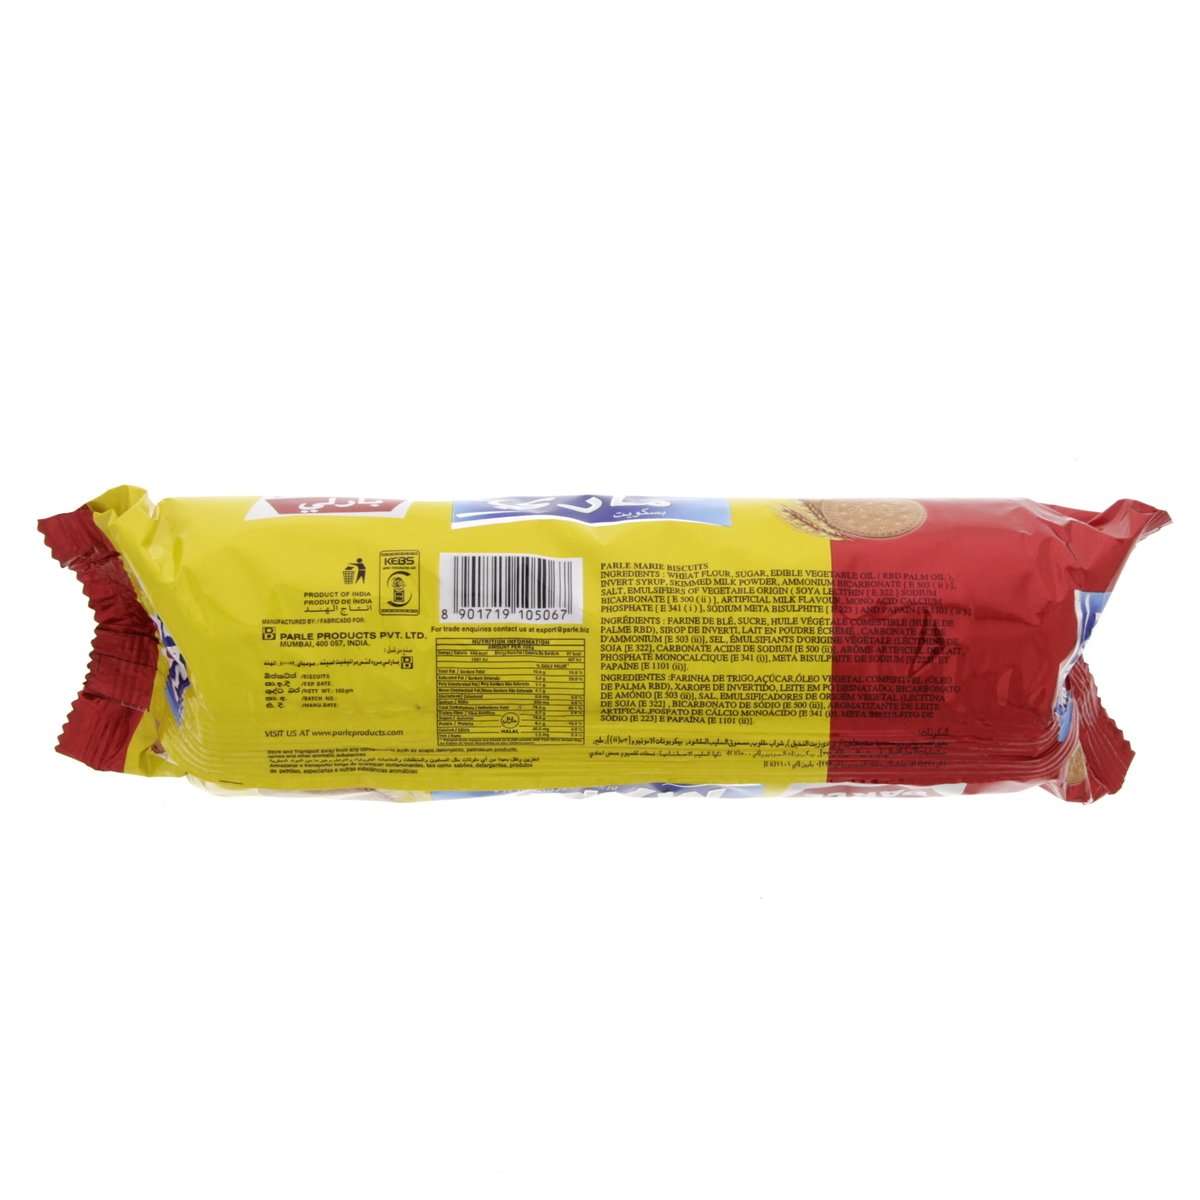 Parle Marie Biscuits 150g